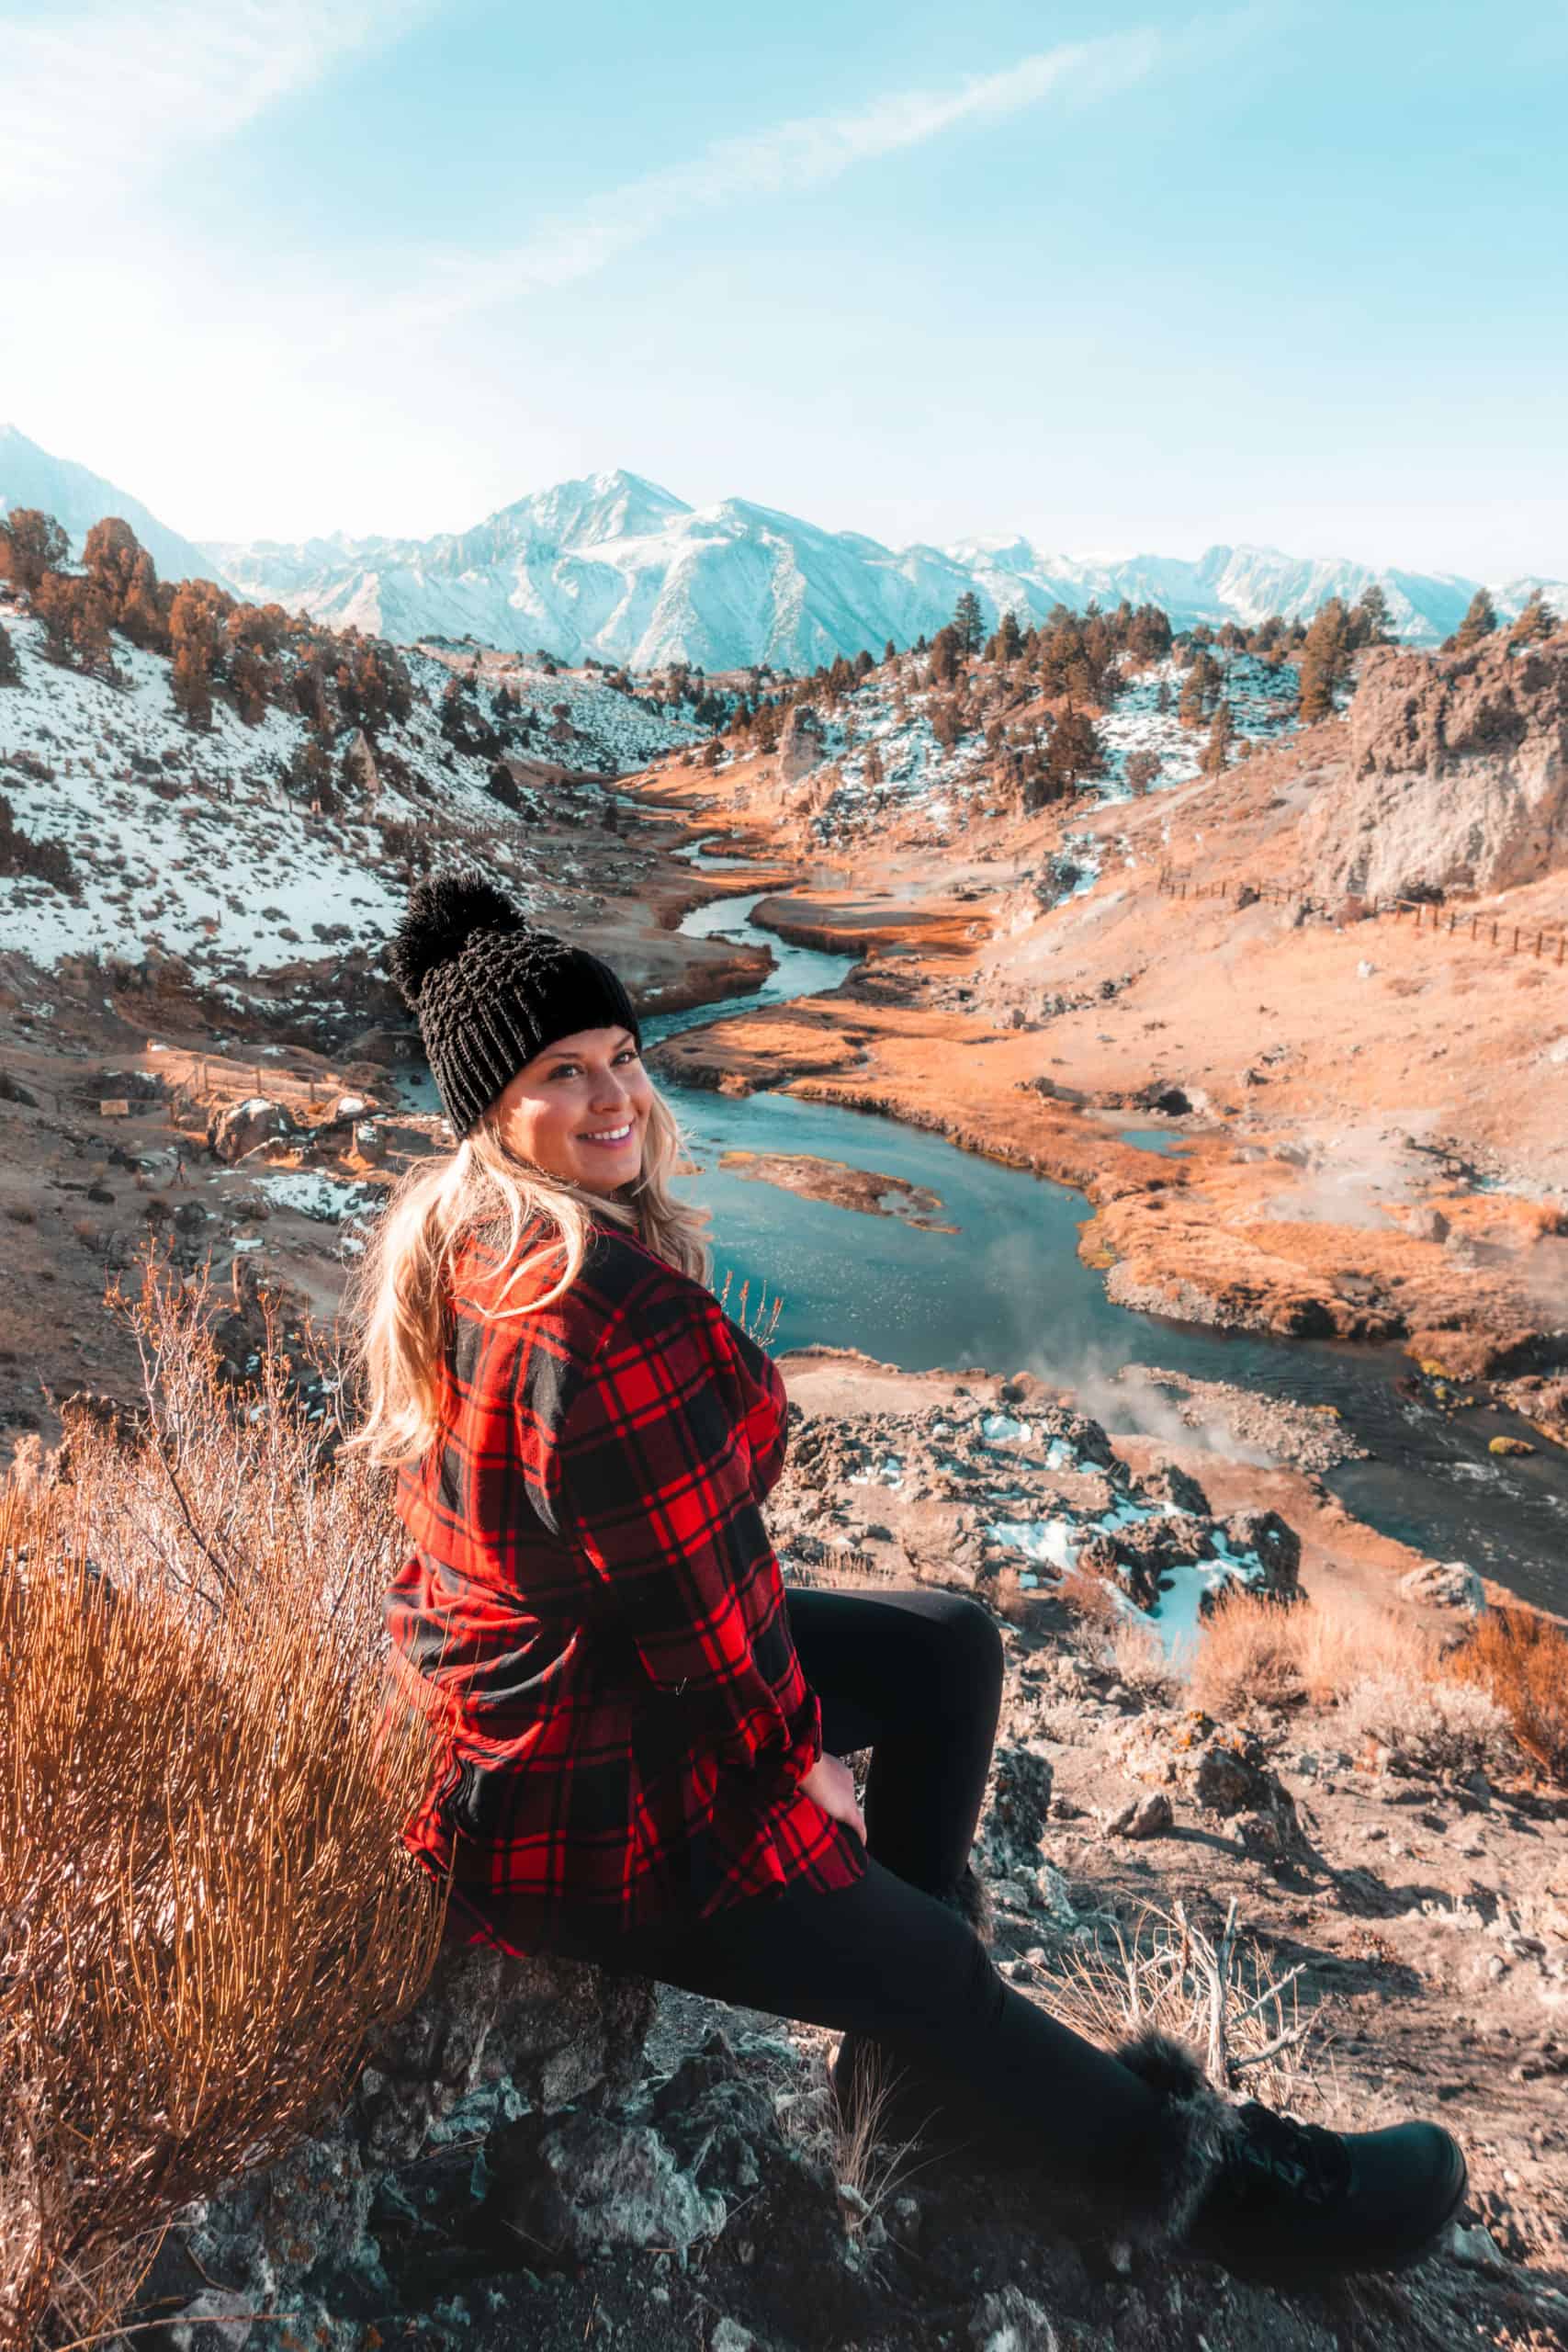 Mammoth Hot Creek Geological Site | The Ultimate Guide to Mammoth Lakes in the Winter